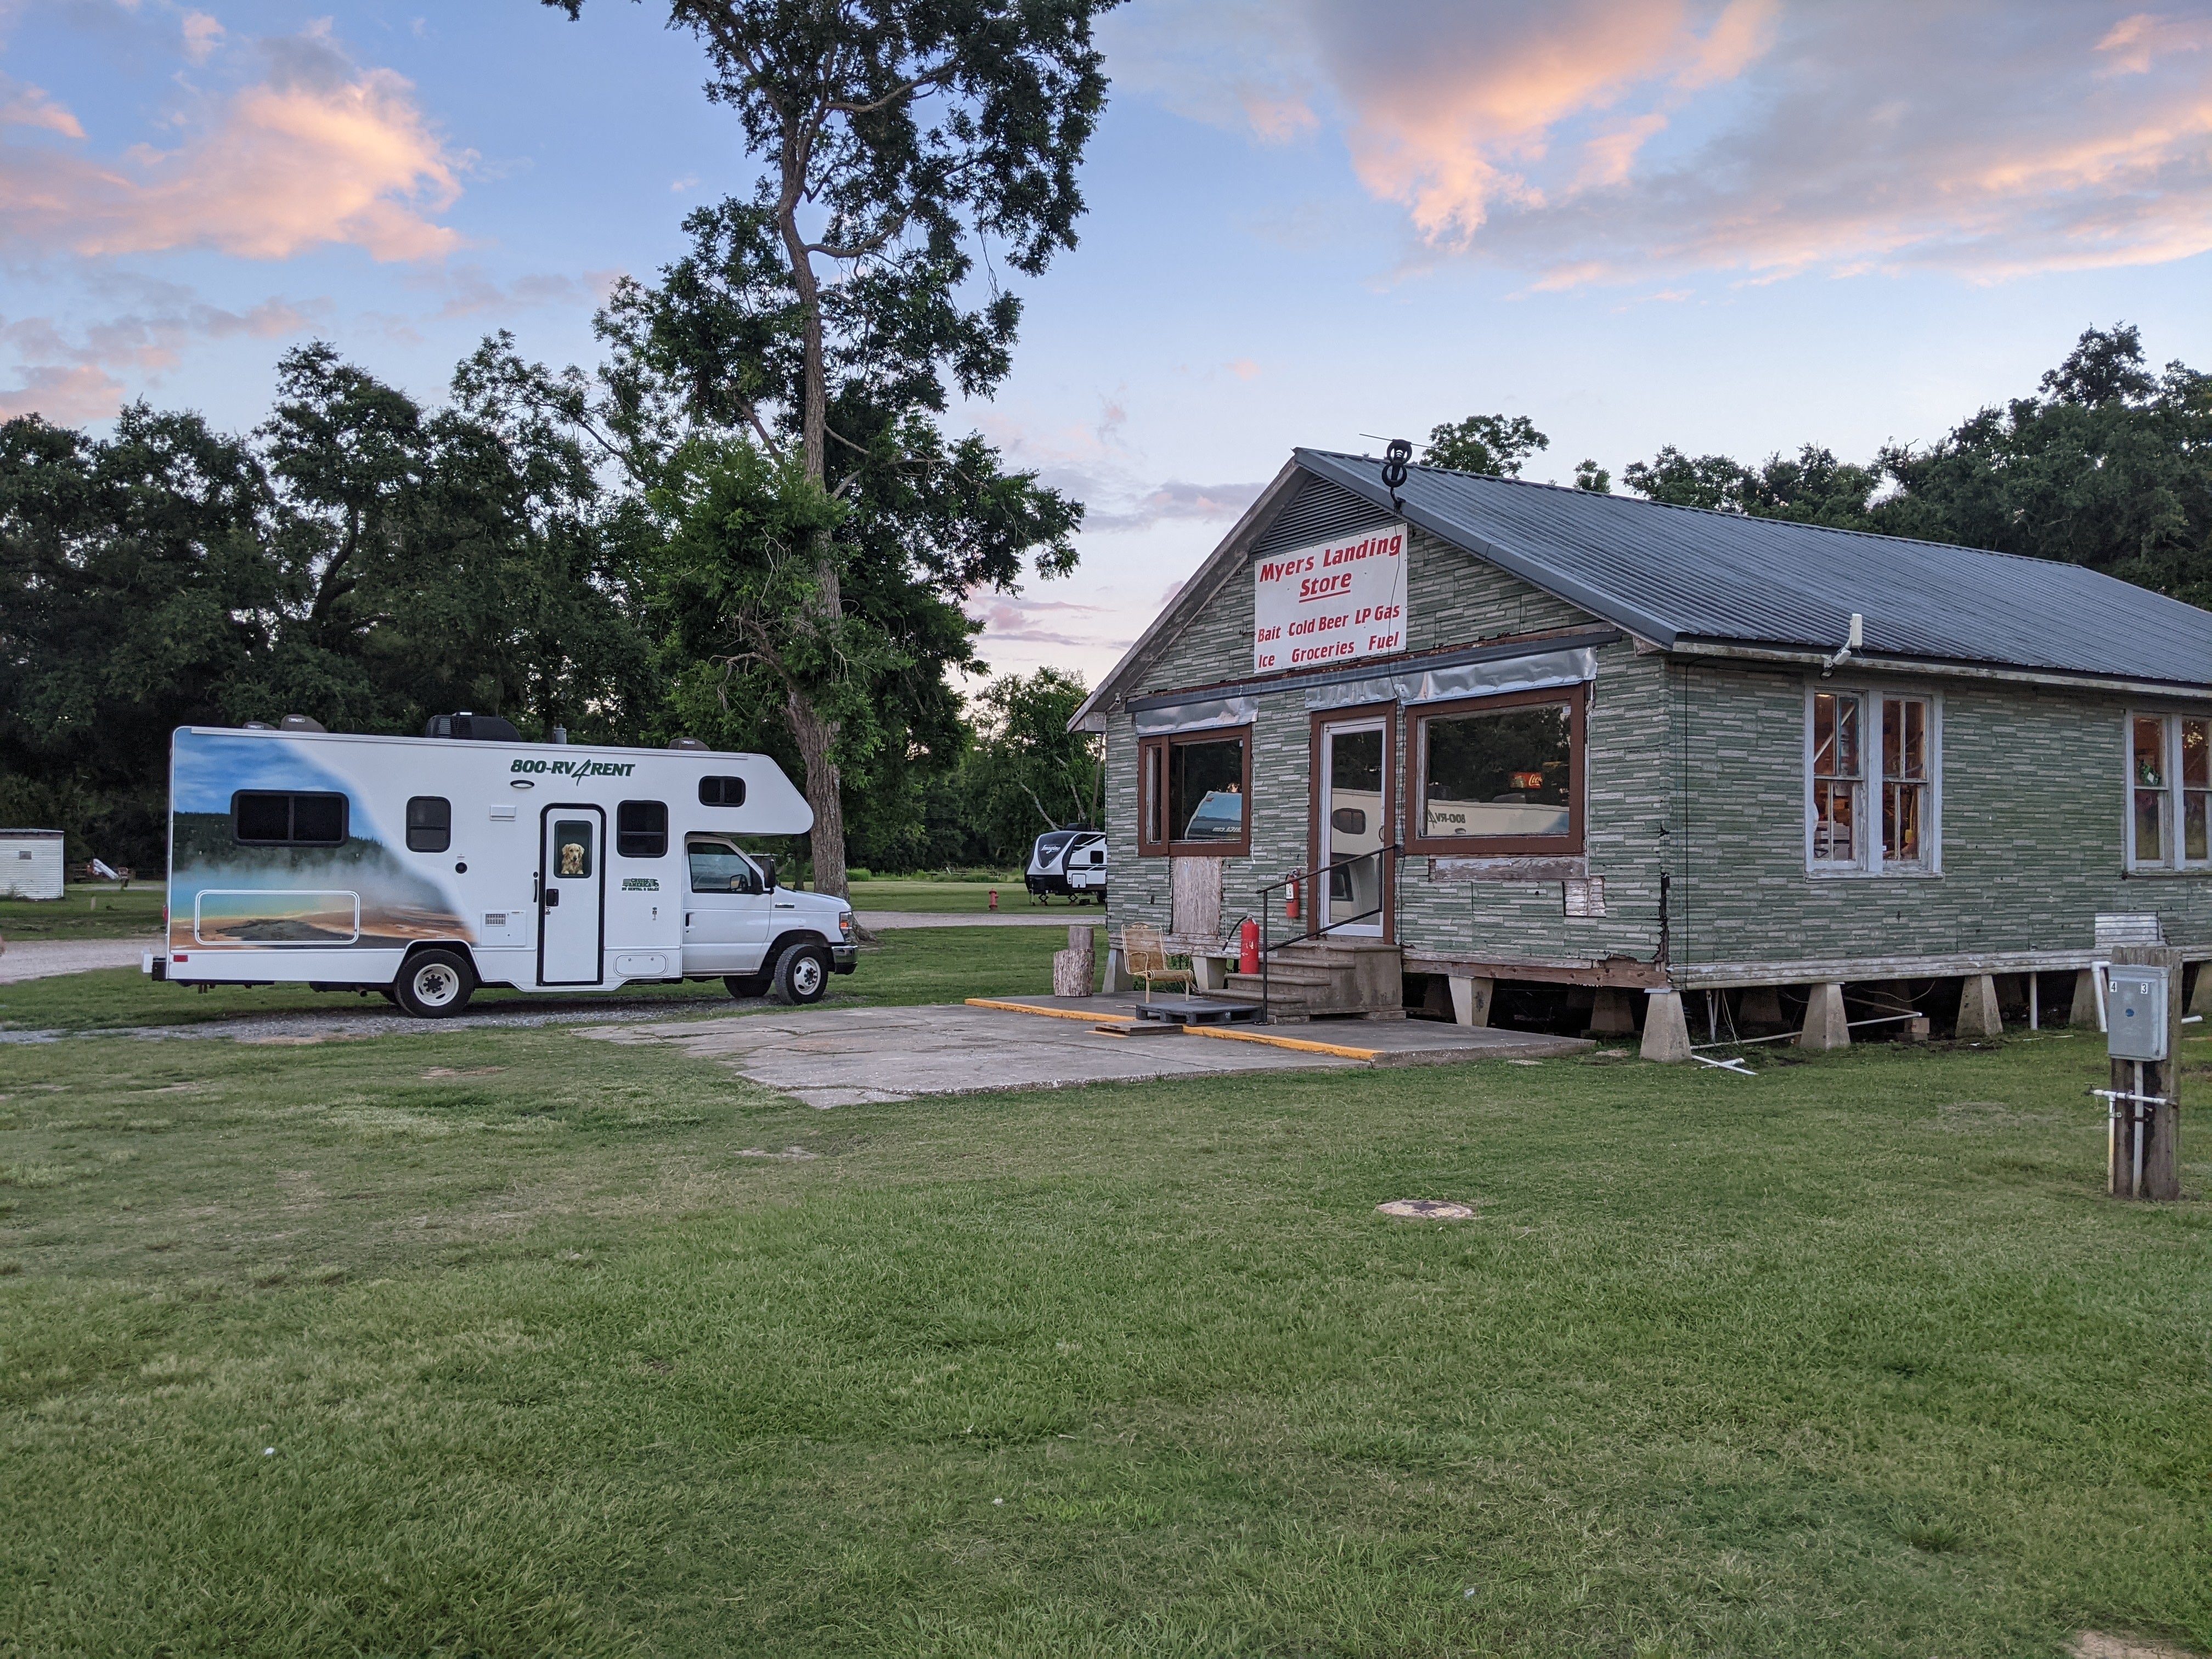 Camper submitted image from Myers Landing and RV Park - 1